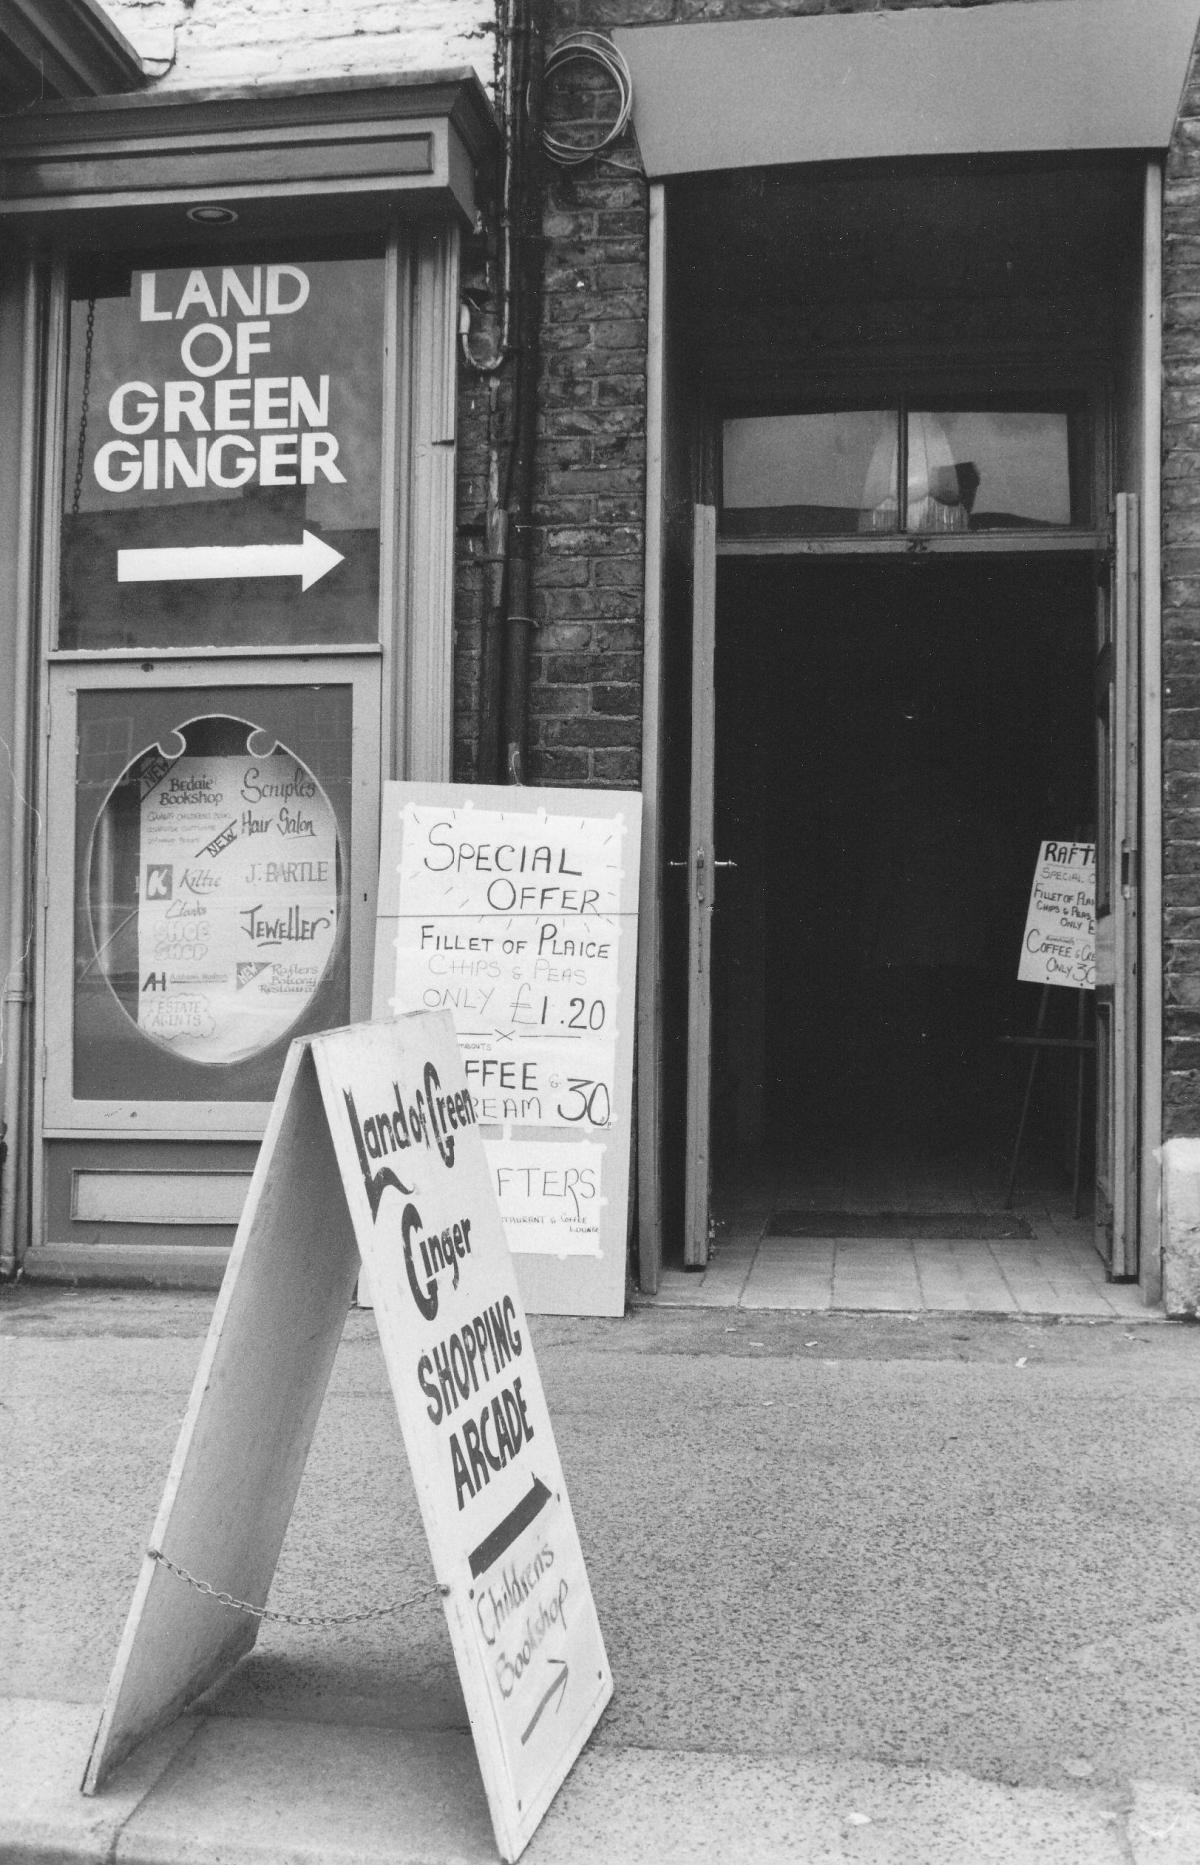 The Land of Green Ginger shopping arcade in Bedale offers plaice, chips and peas for £1.20 in May 1985